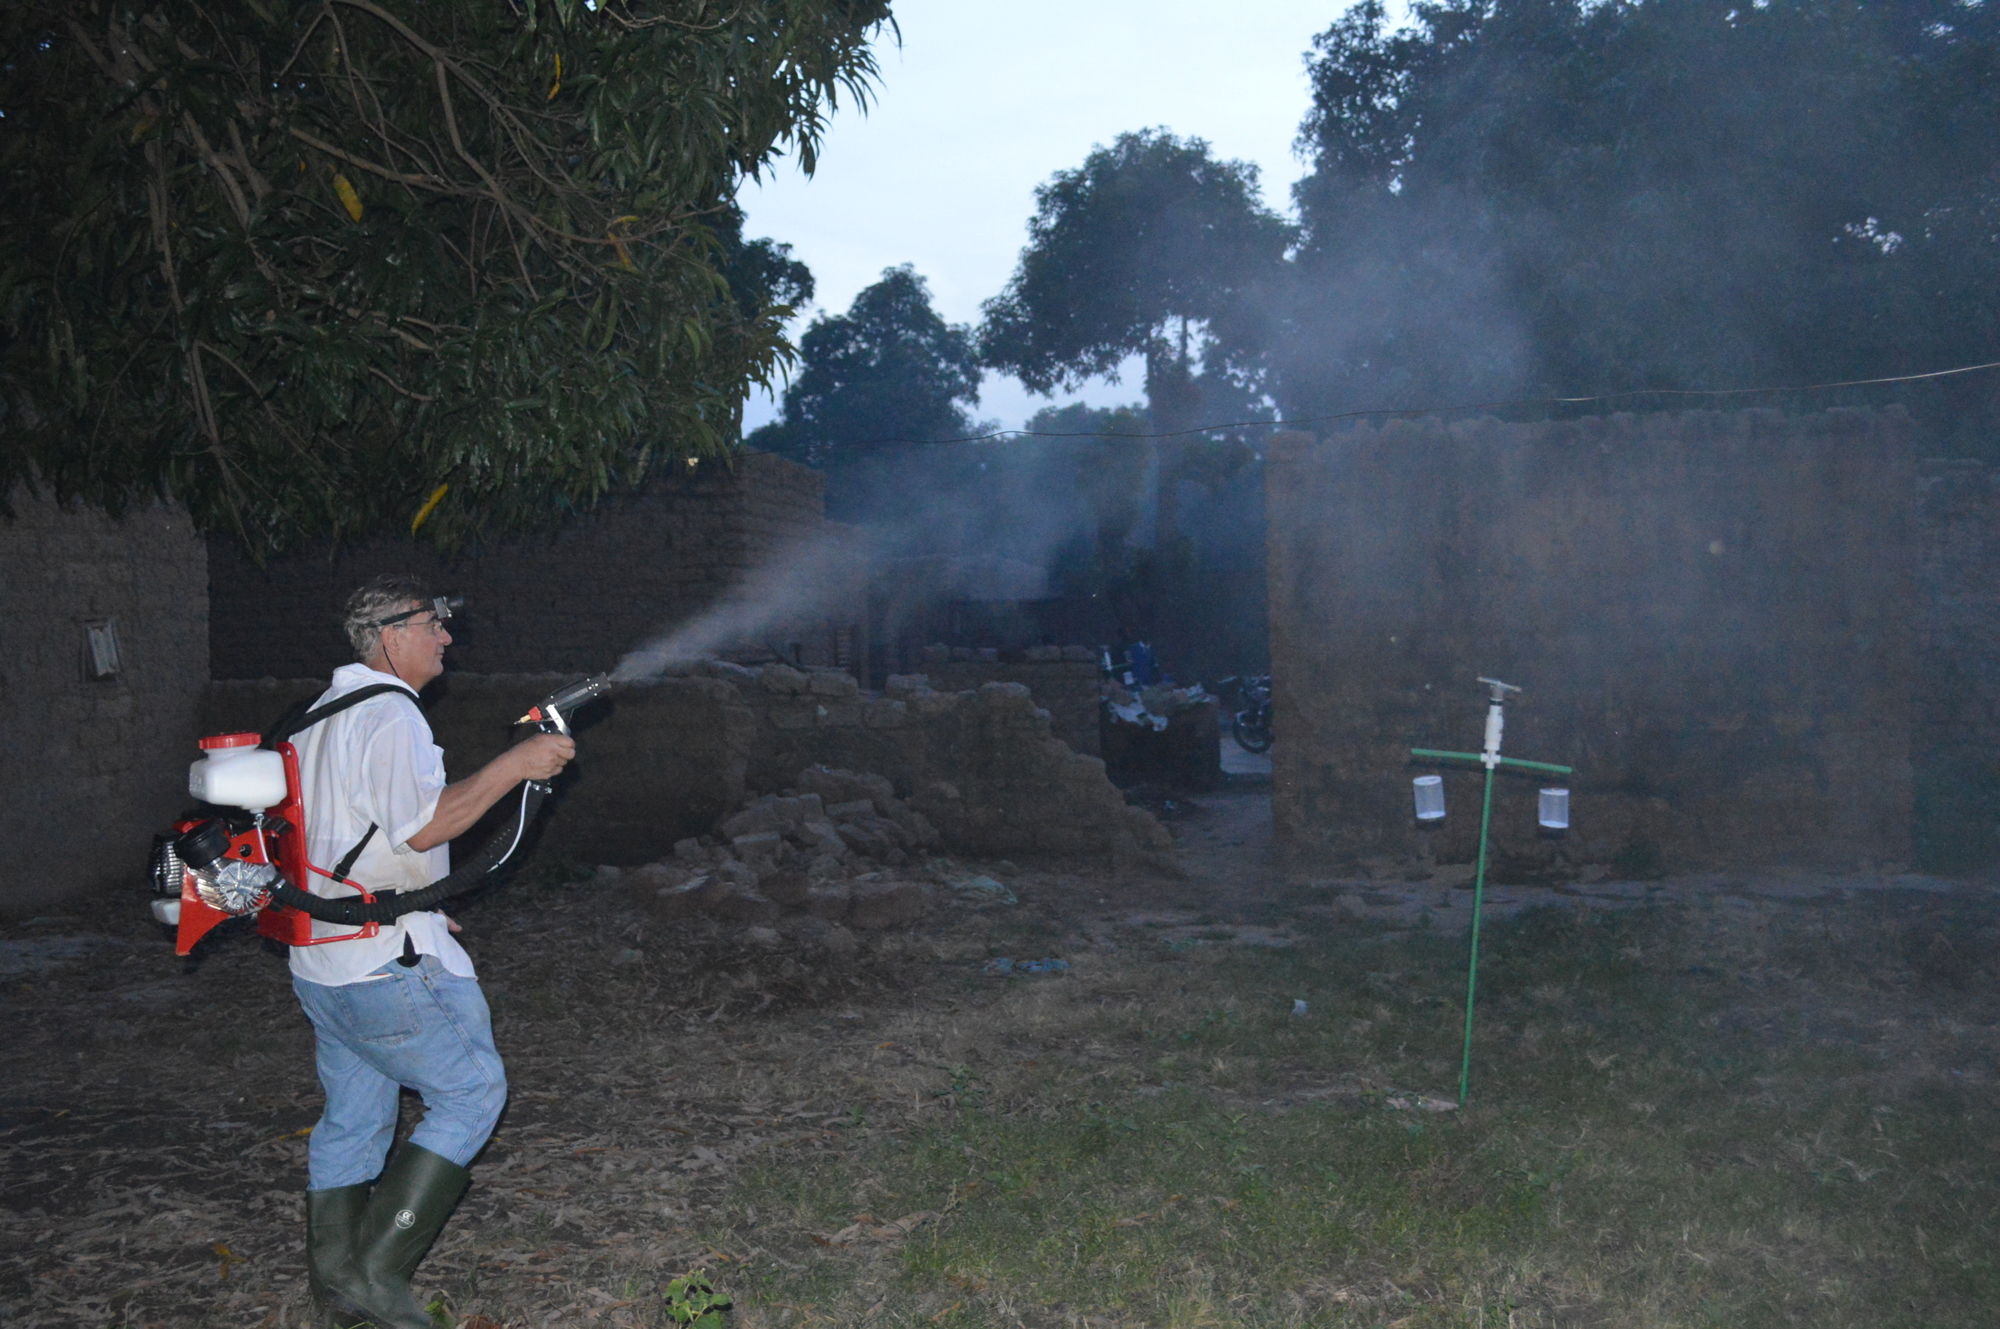 Mill Creek's Mark Latham sprays a swarm of mosquitoes with a motorized backpack sprayer in a small village in Burkina Faso.